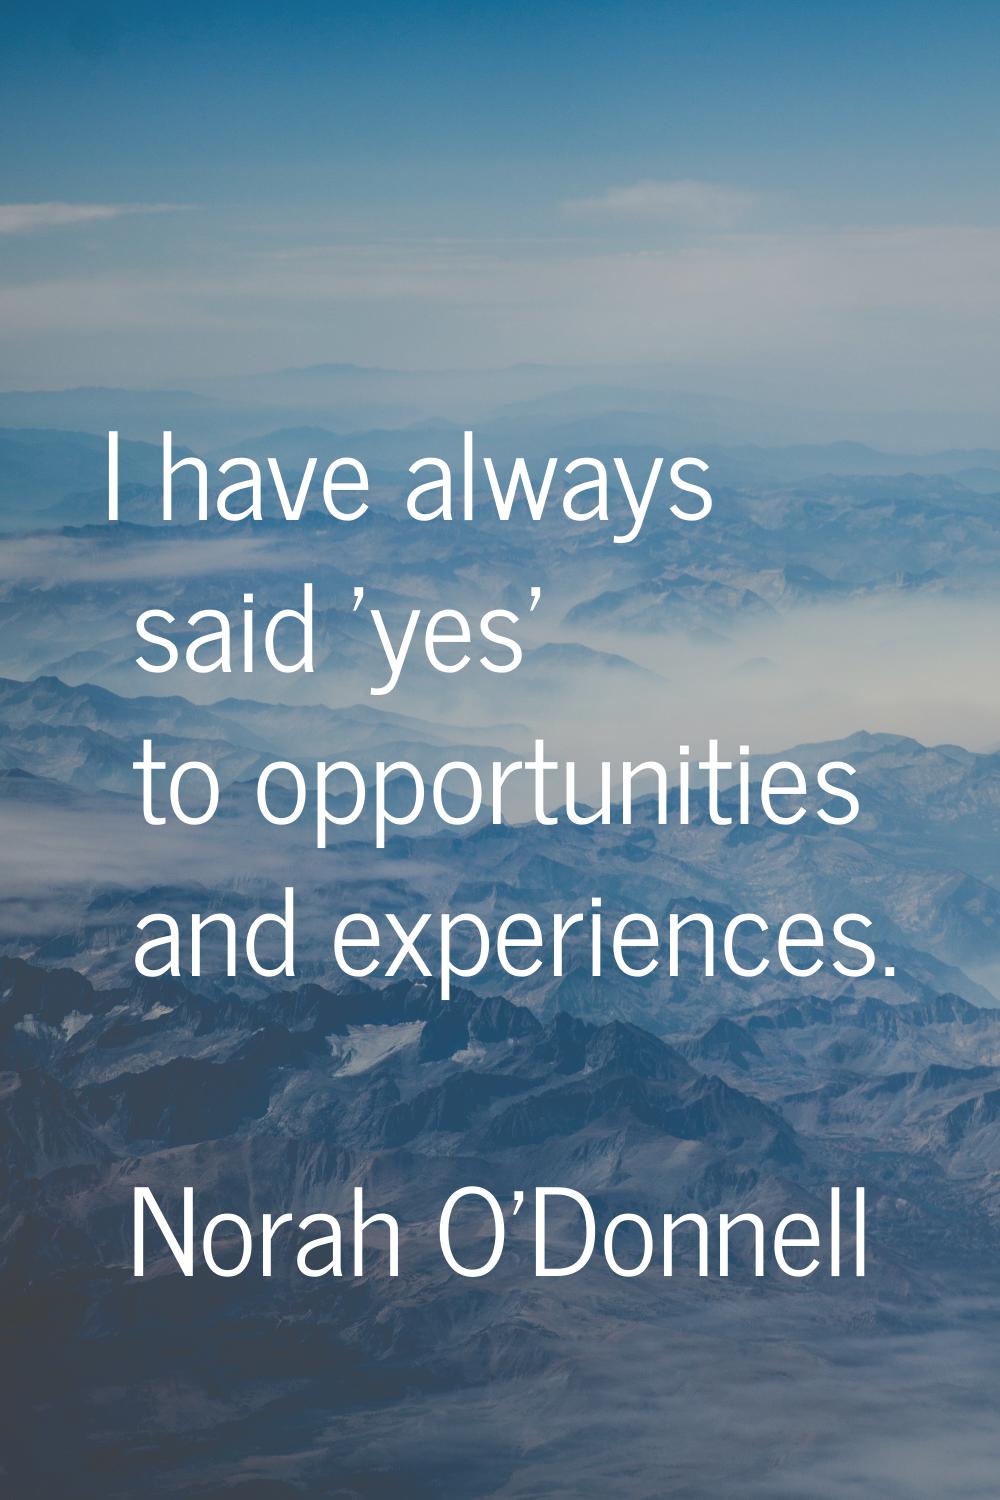 I have always said 'yes' to opportunities and experiences.